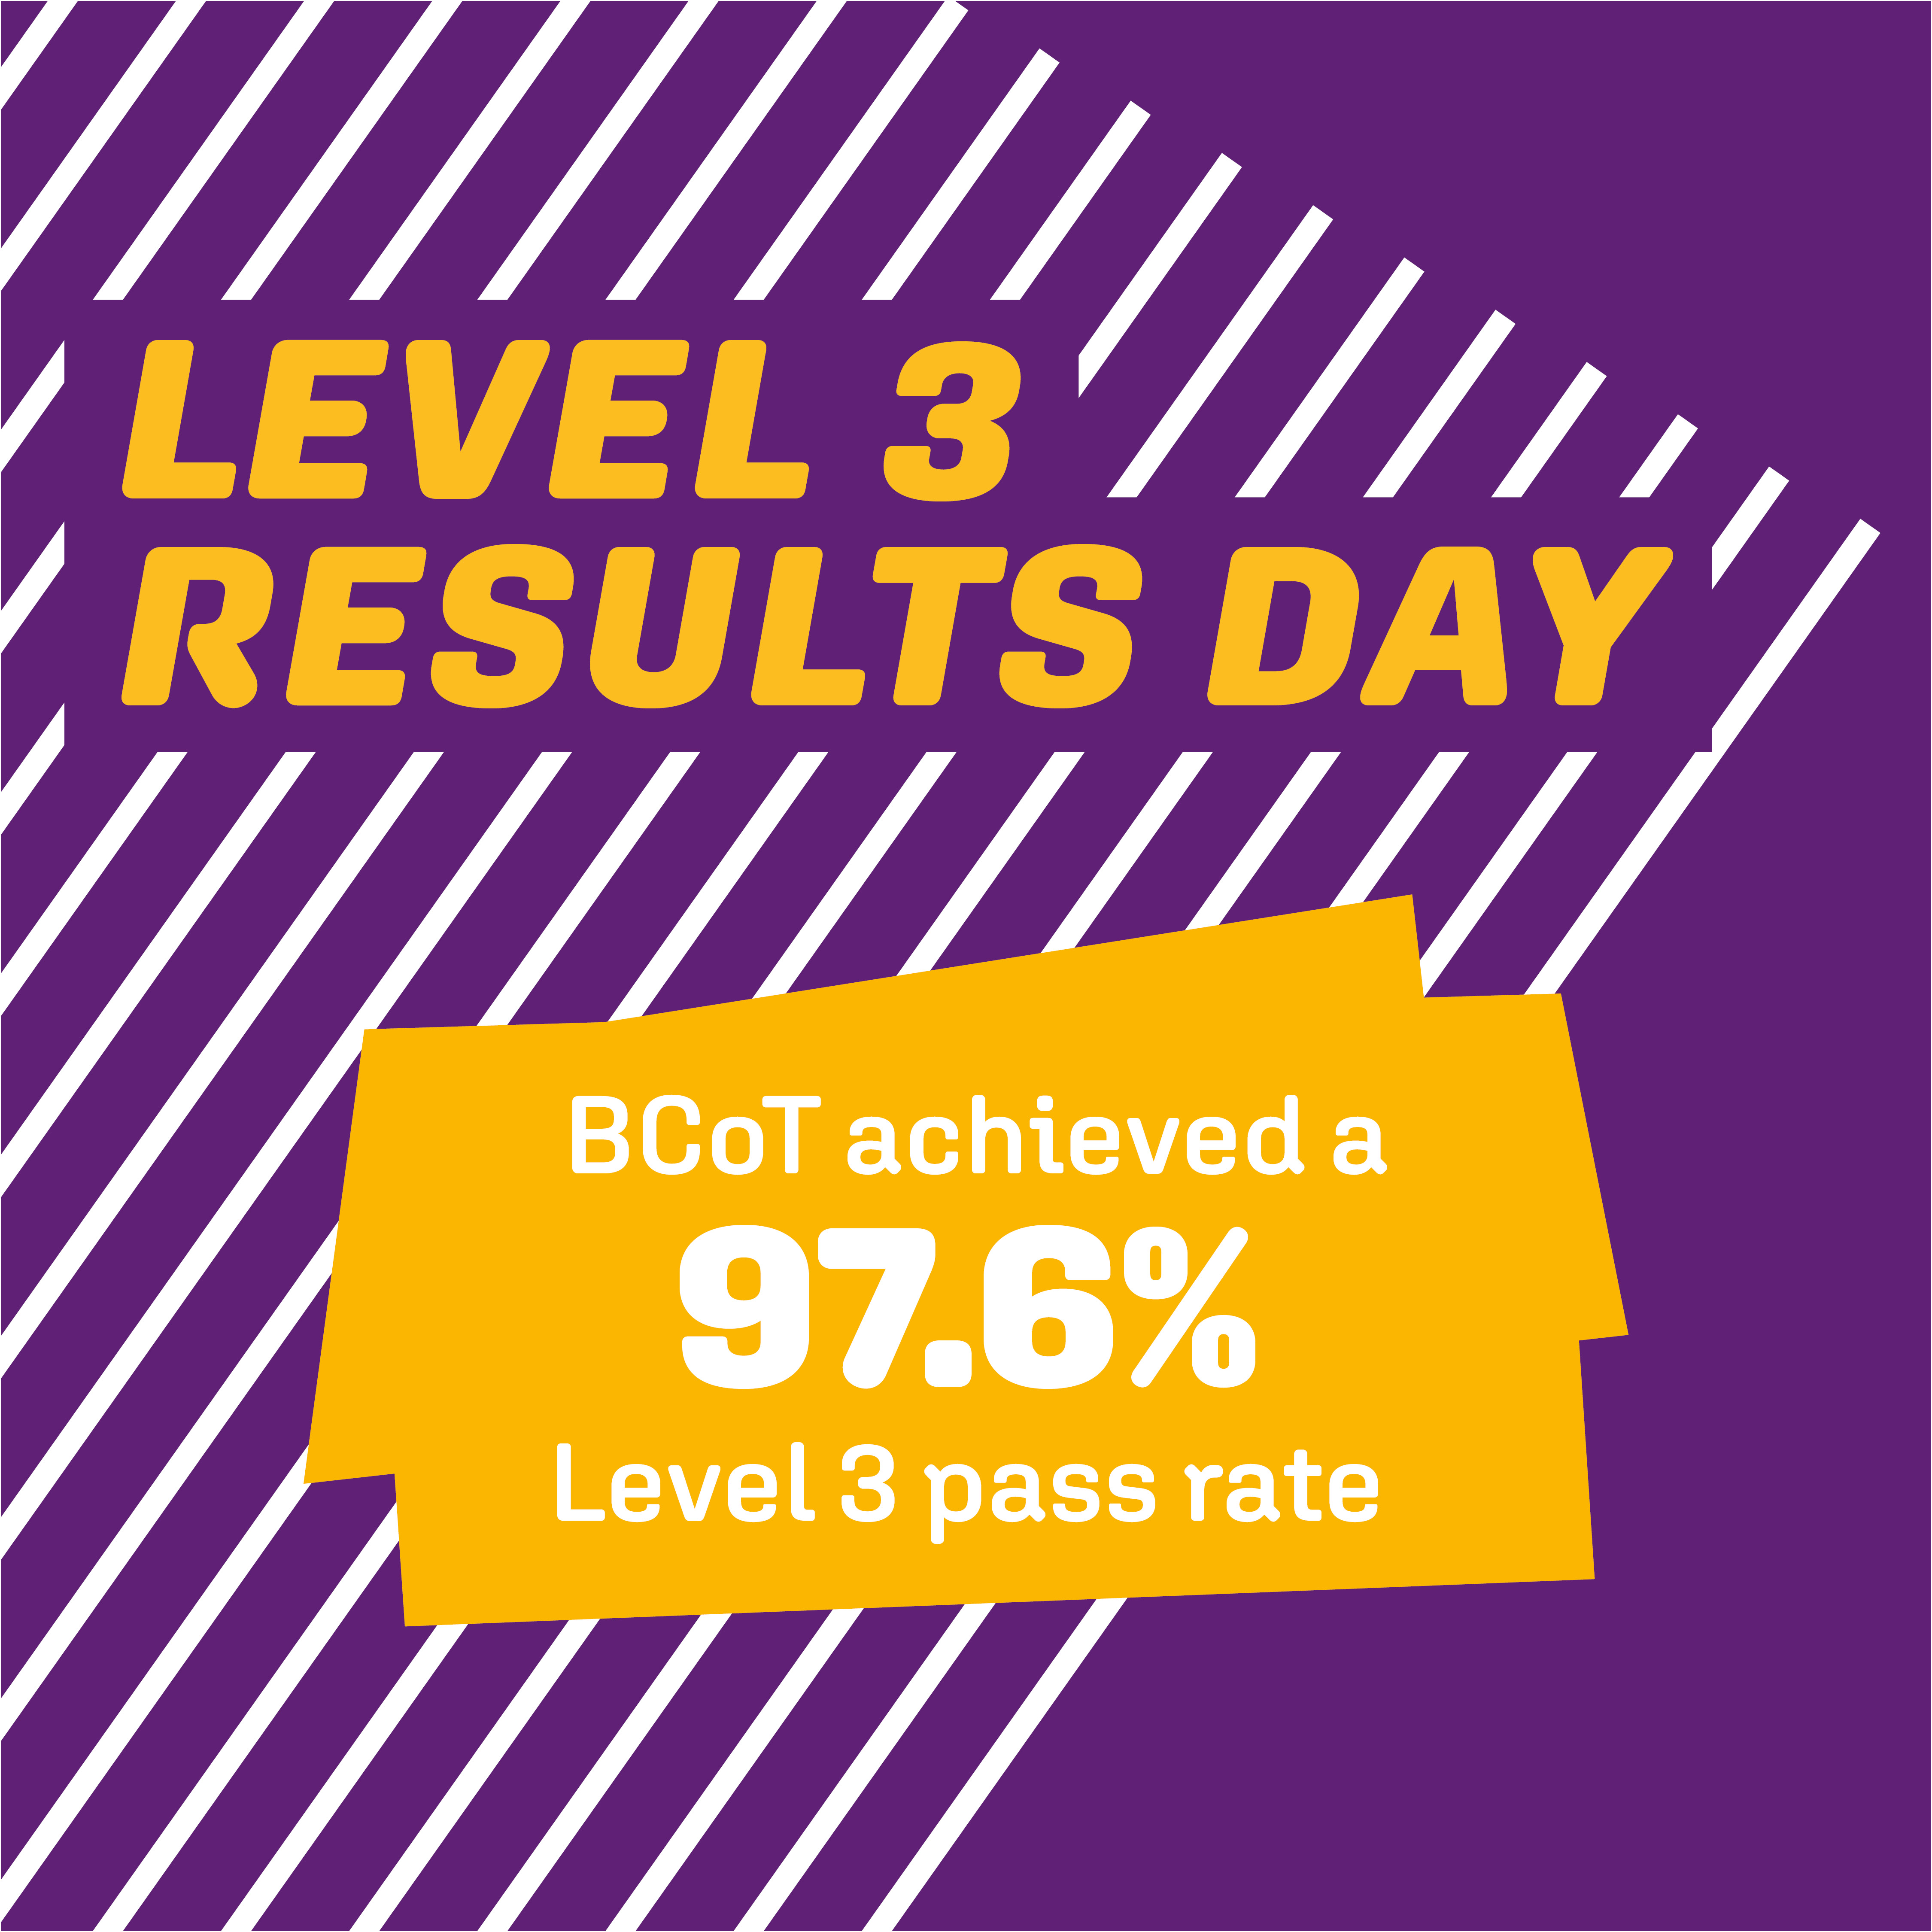 Level 3 Results Day image